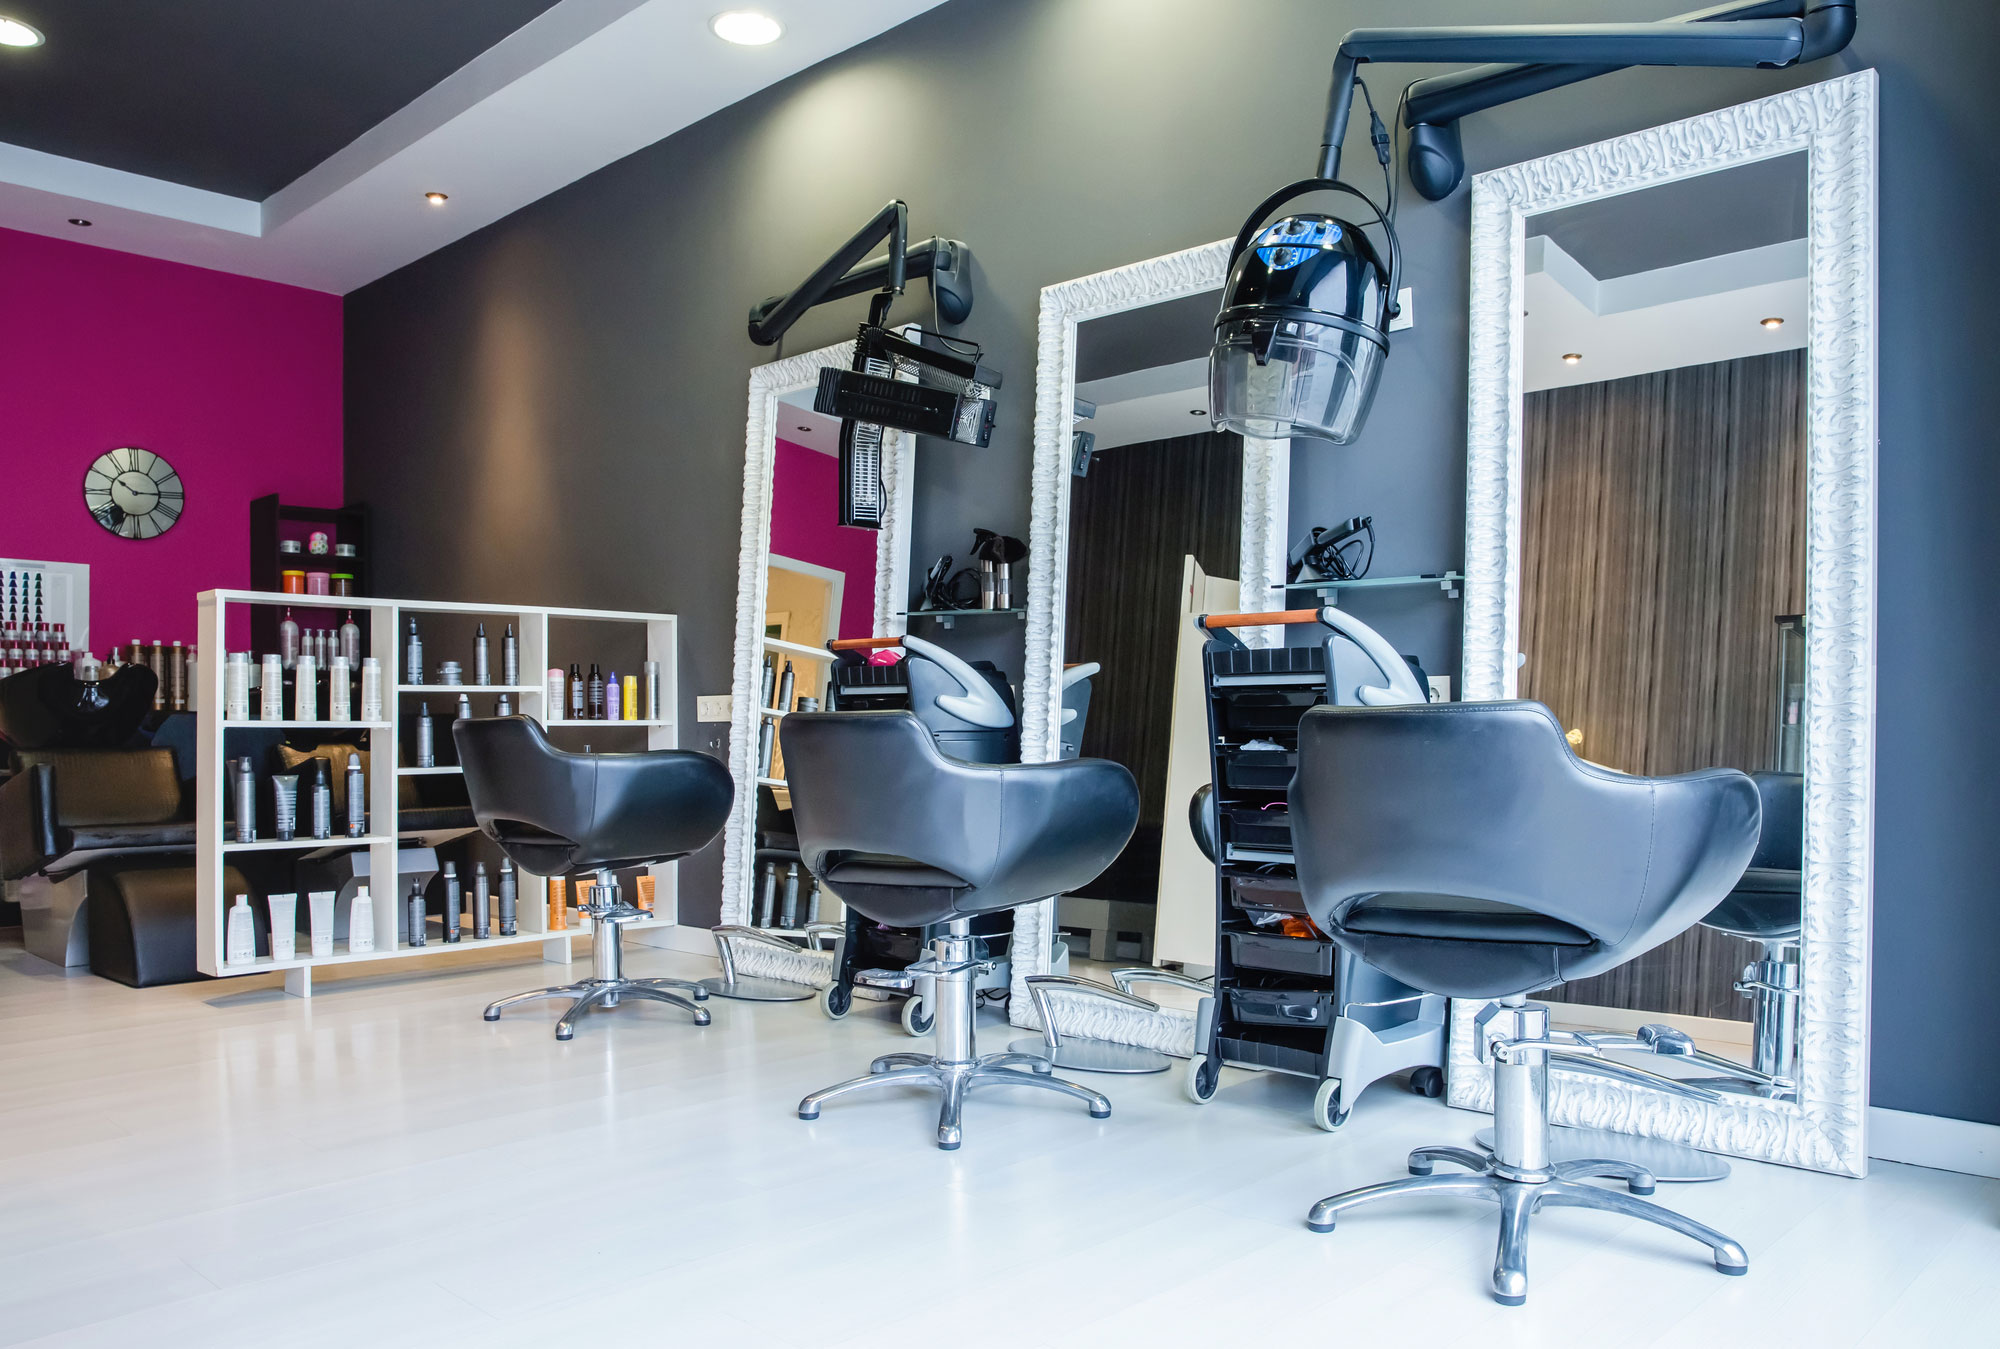 Aged care hair salon in retirement community